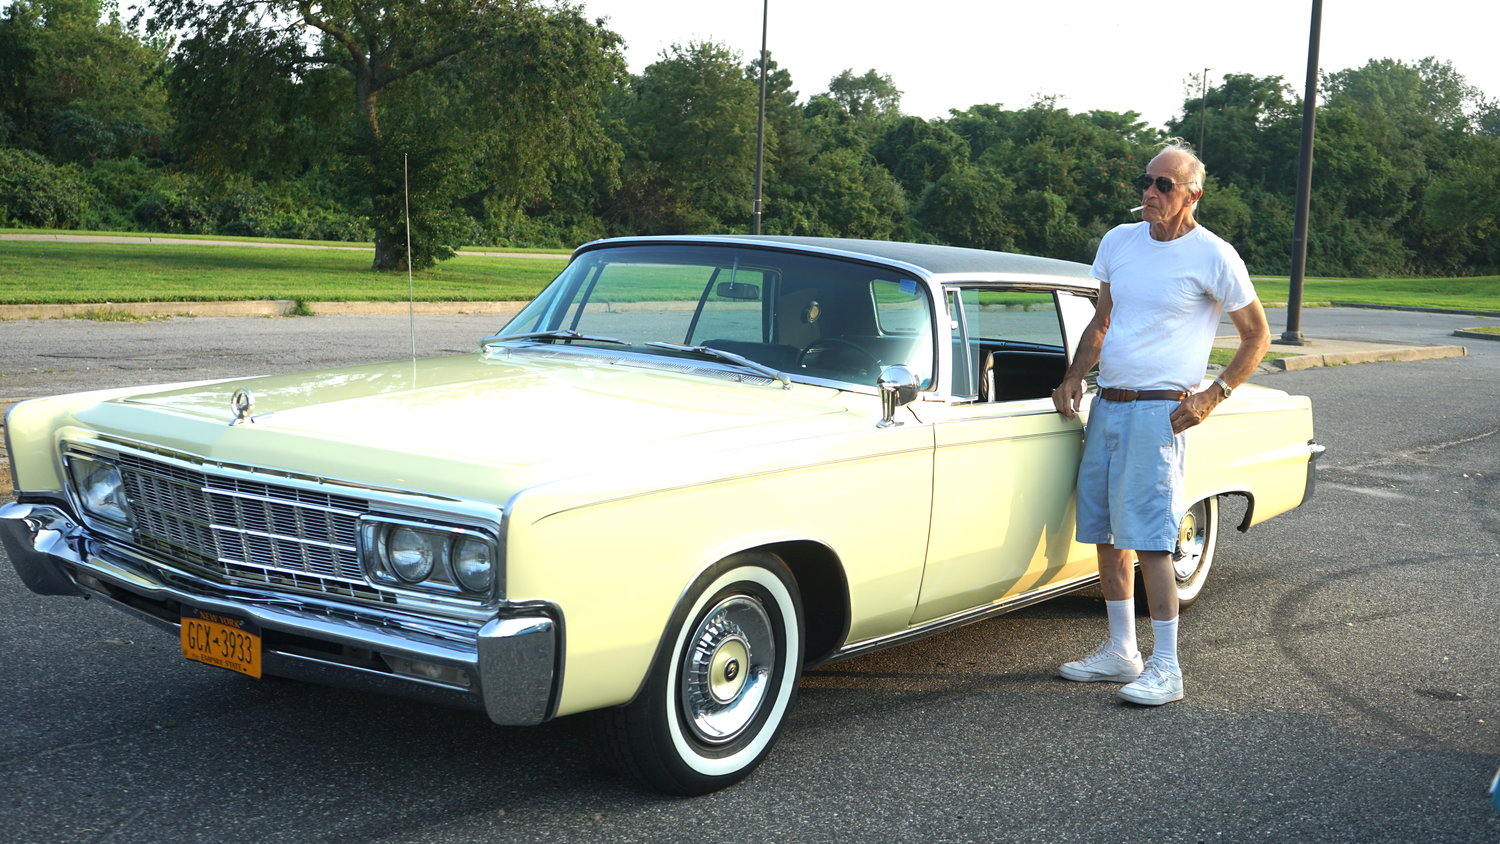 Car enthusiasts revved up for Baldwin show